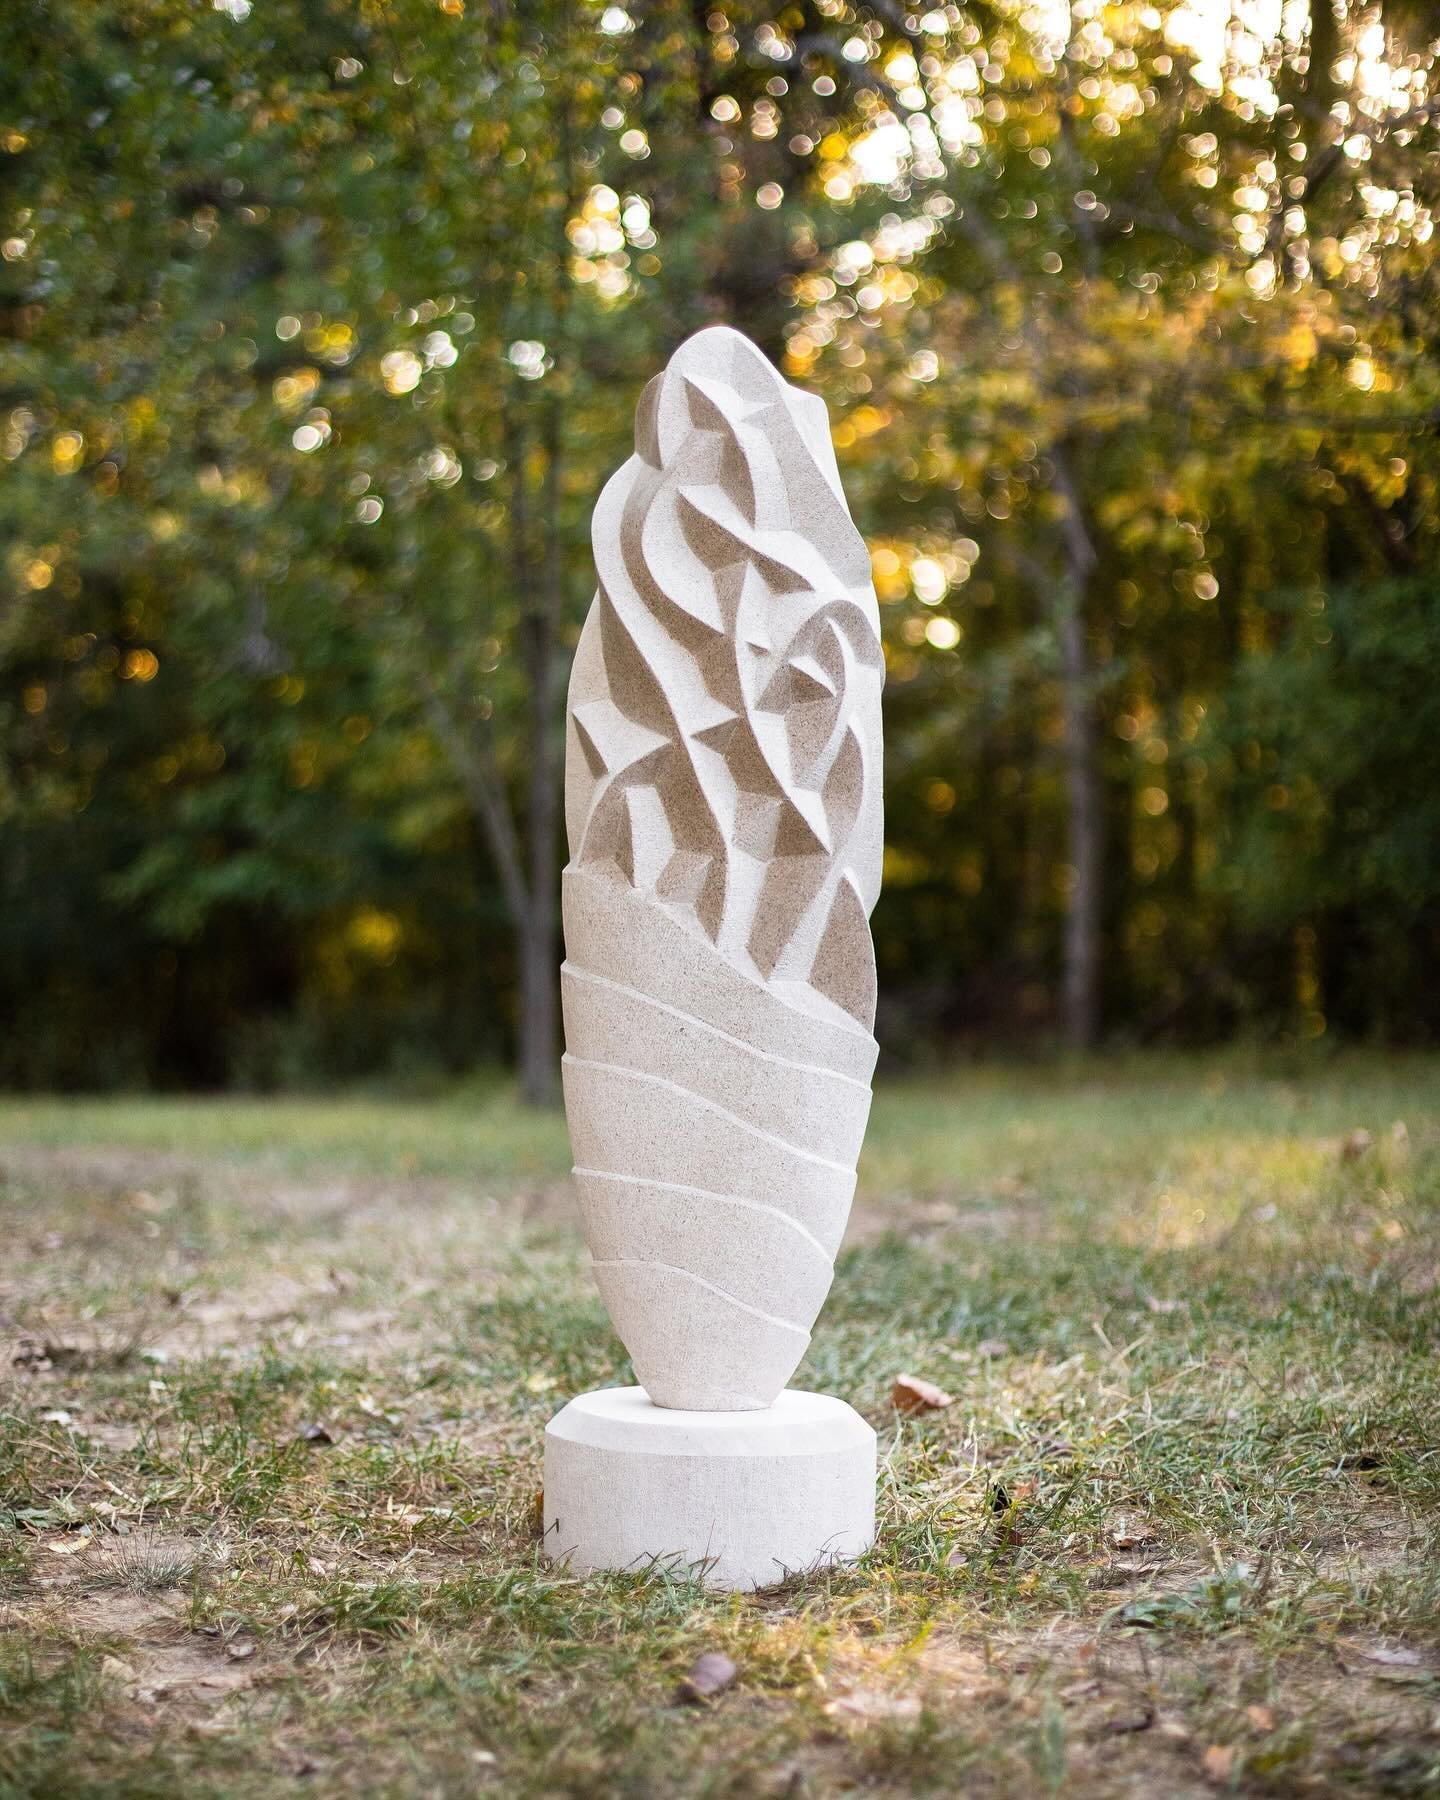 Stephen Hutchins
Joelton, TN

Welcome back to the show Stephen!

I&rsquo;ve worked with stone over the last two decades as a stone mason and architectural stone carver. As a self-taught artist, sculpture has been a creative escape from the square and